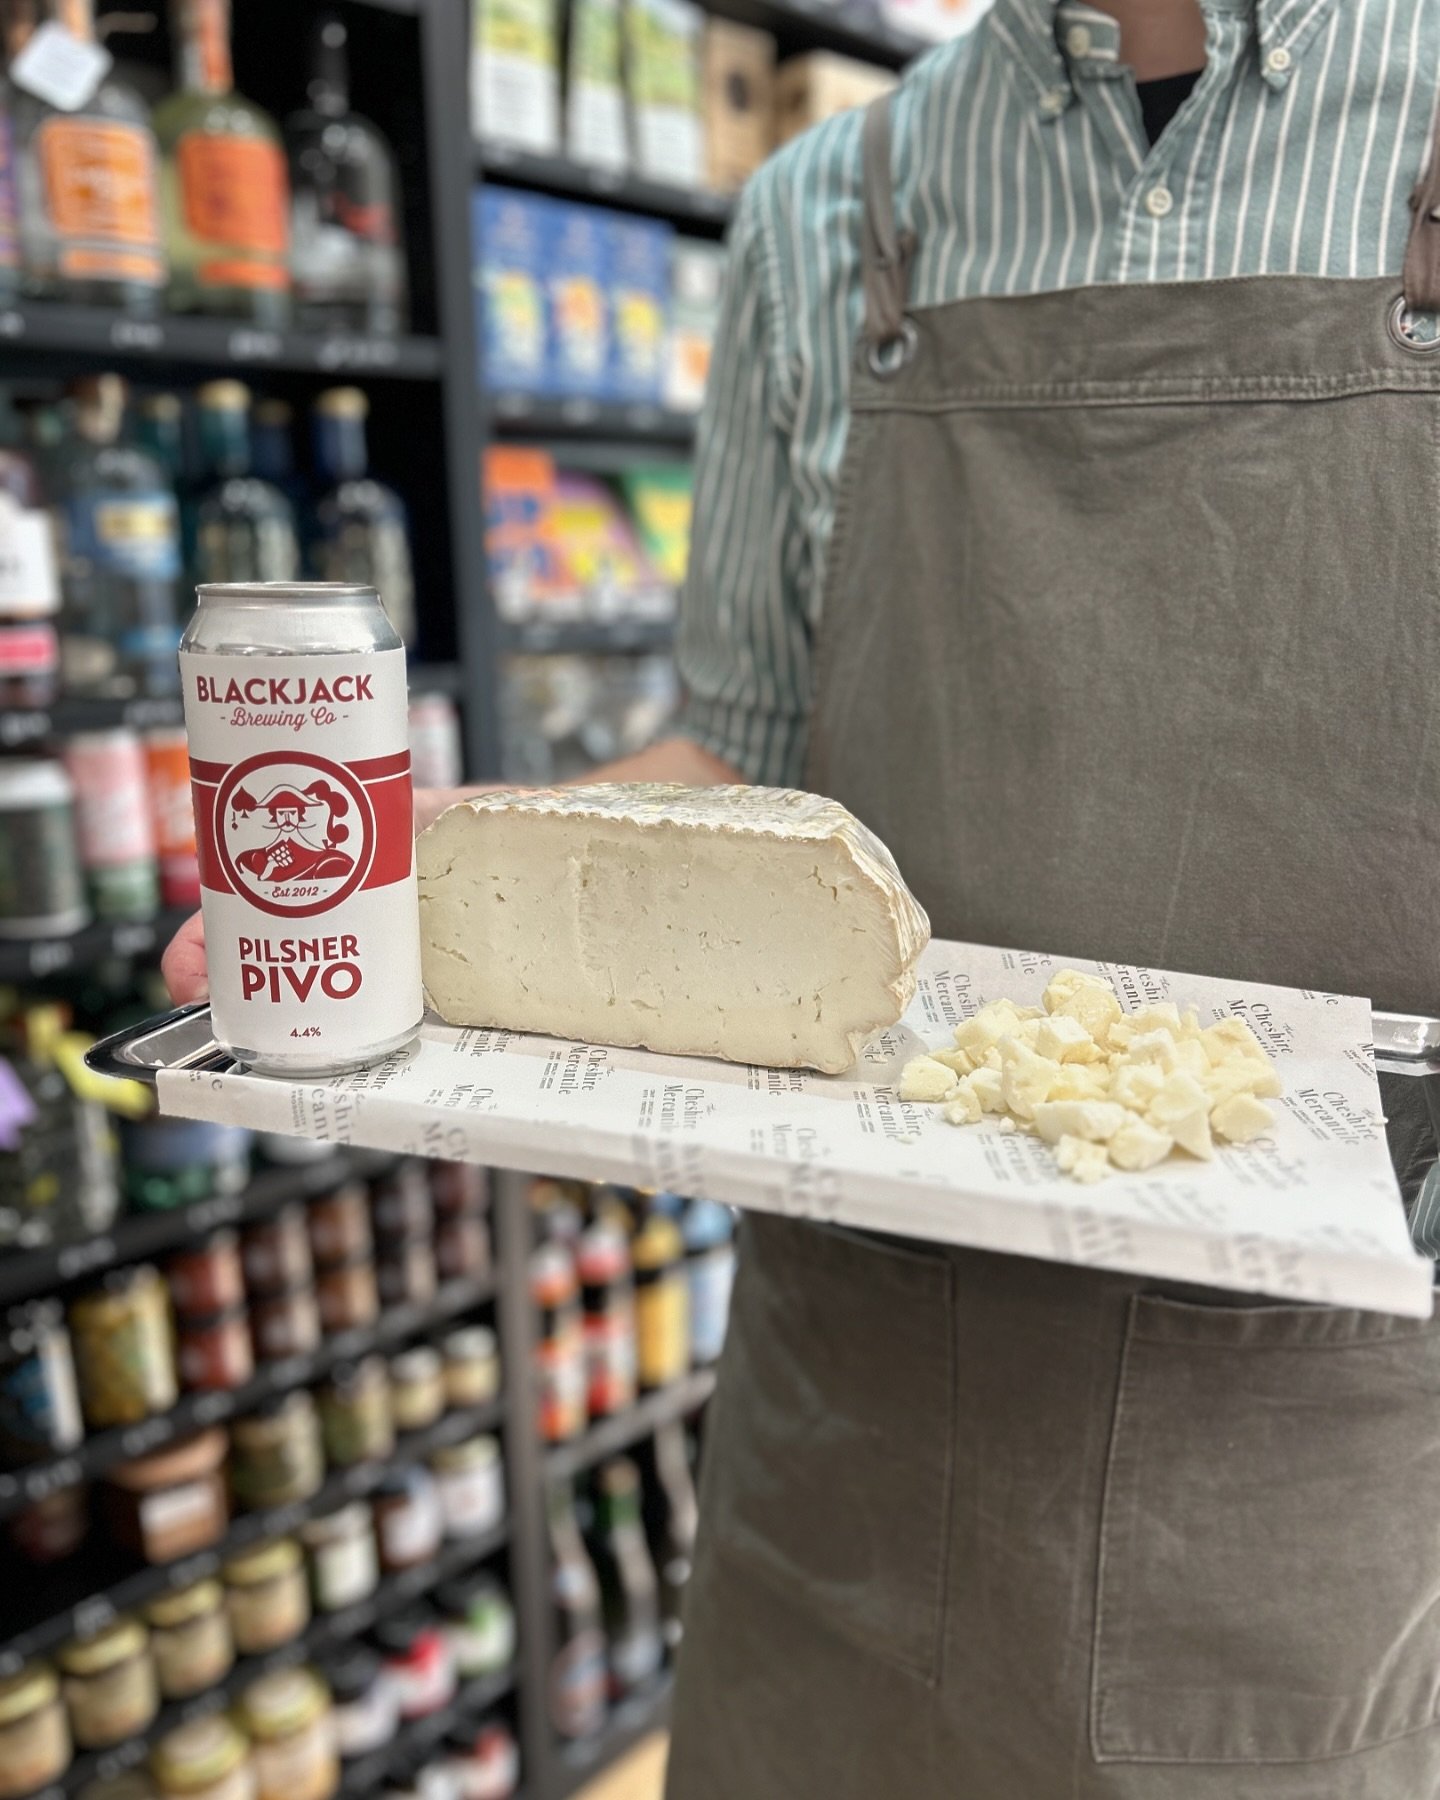 Saturday Sampling! Have you tried Ticklemore? It&rsquo;s a delicious goat&rsquo;s cheese made in Devon by @sharphamcheese. Nothing more spring-like on a sunny day than a nice wedge of Ticklemore washed down with a great Pilsner Pivo from @blackjackbe